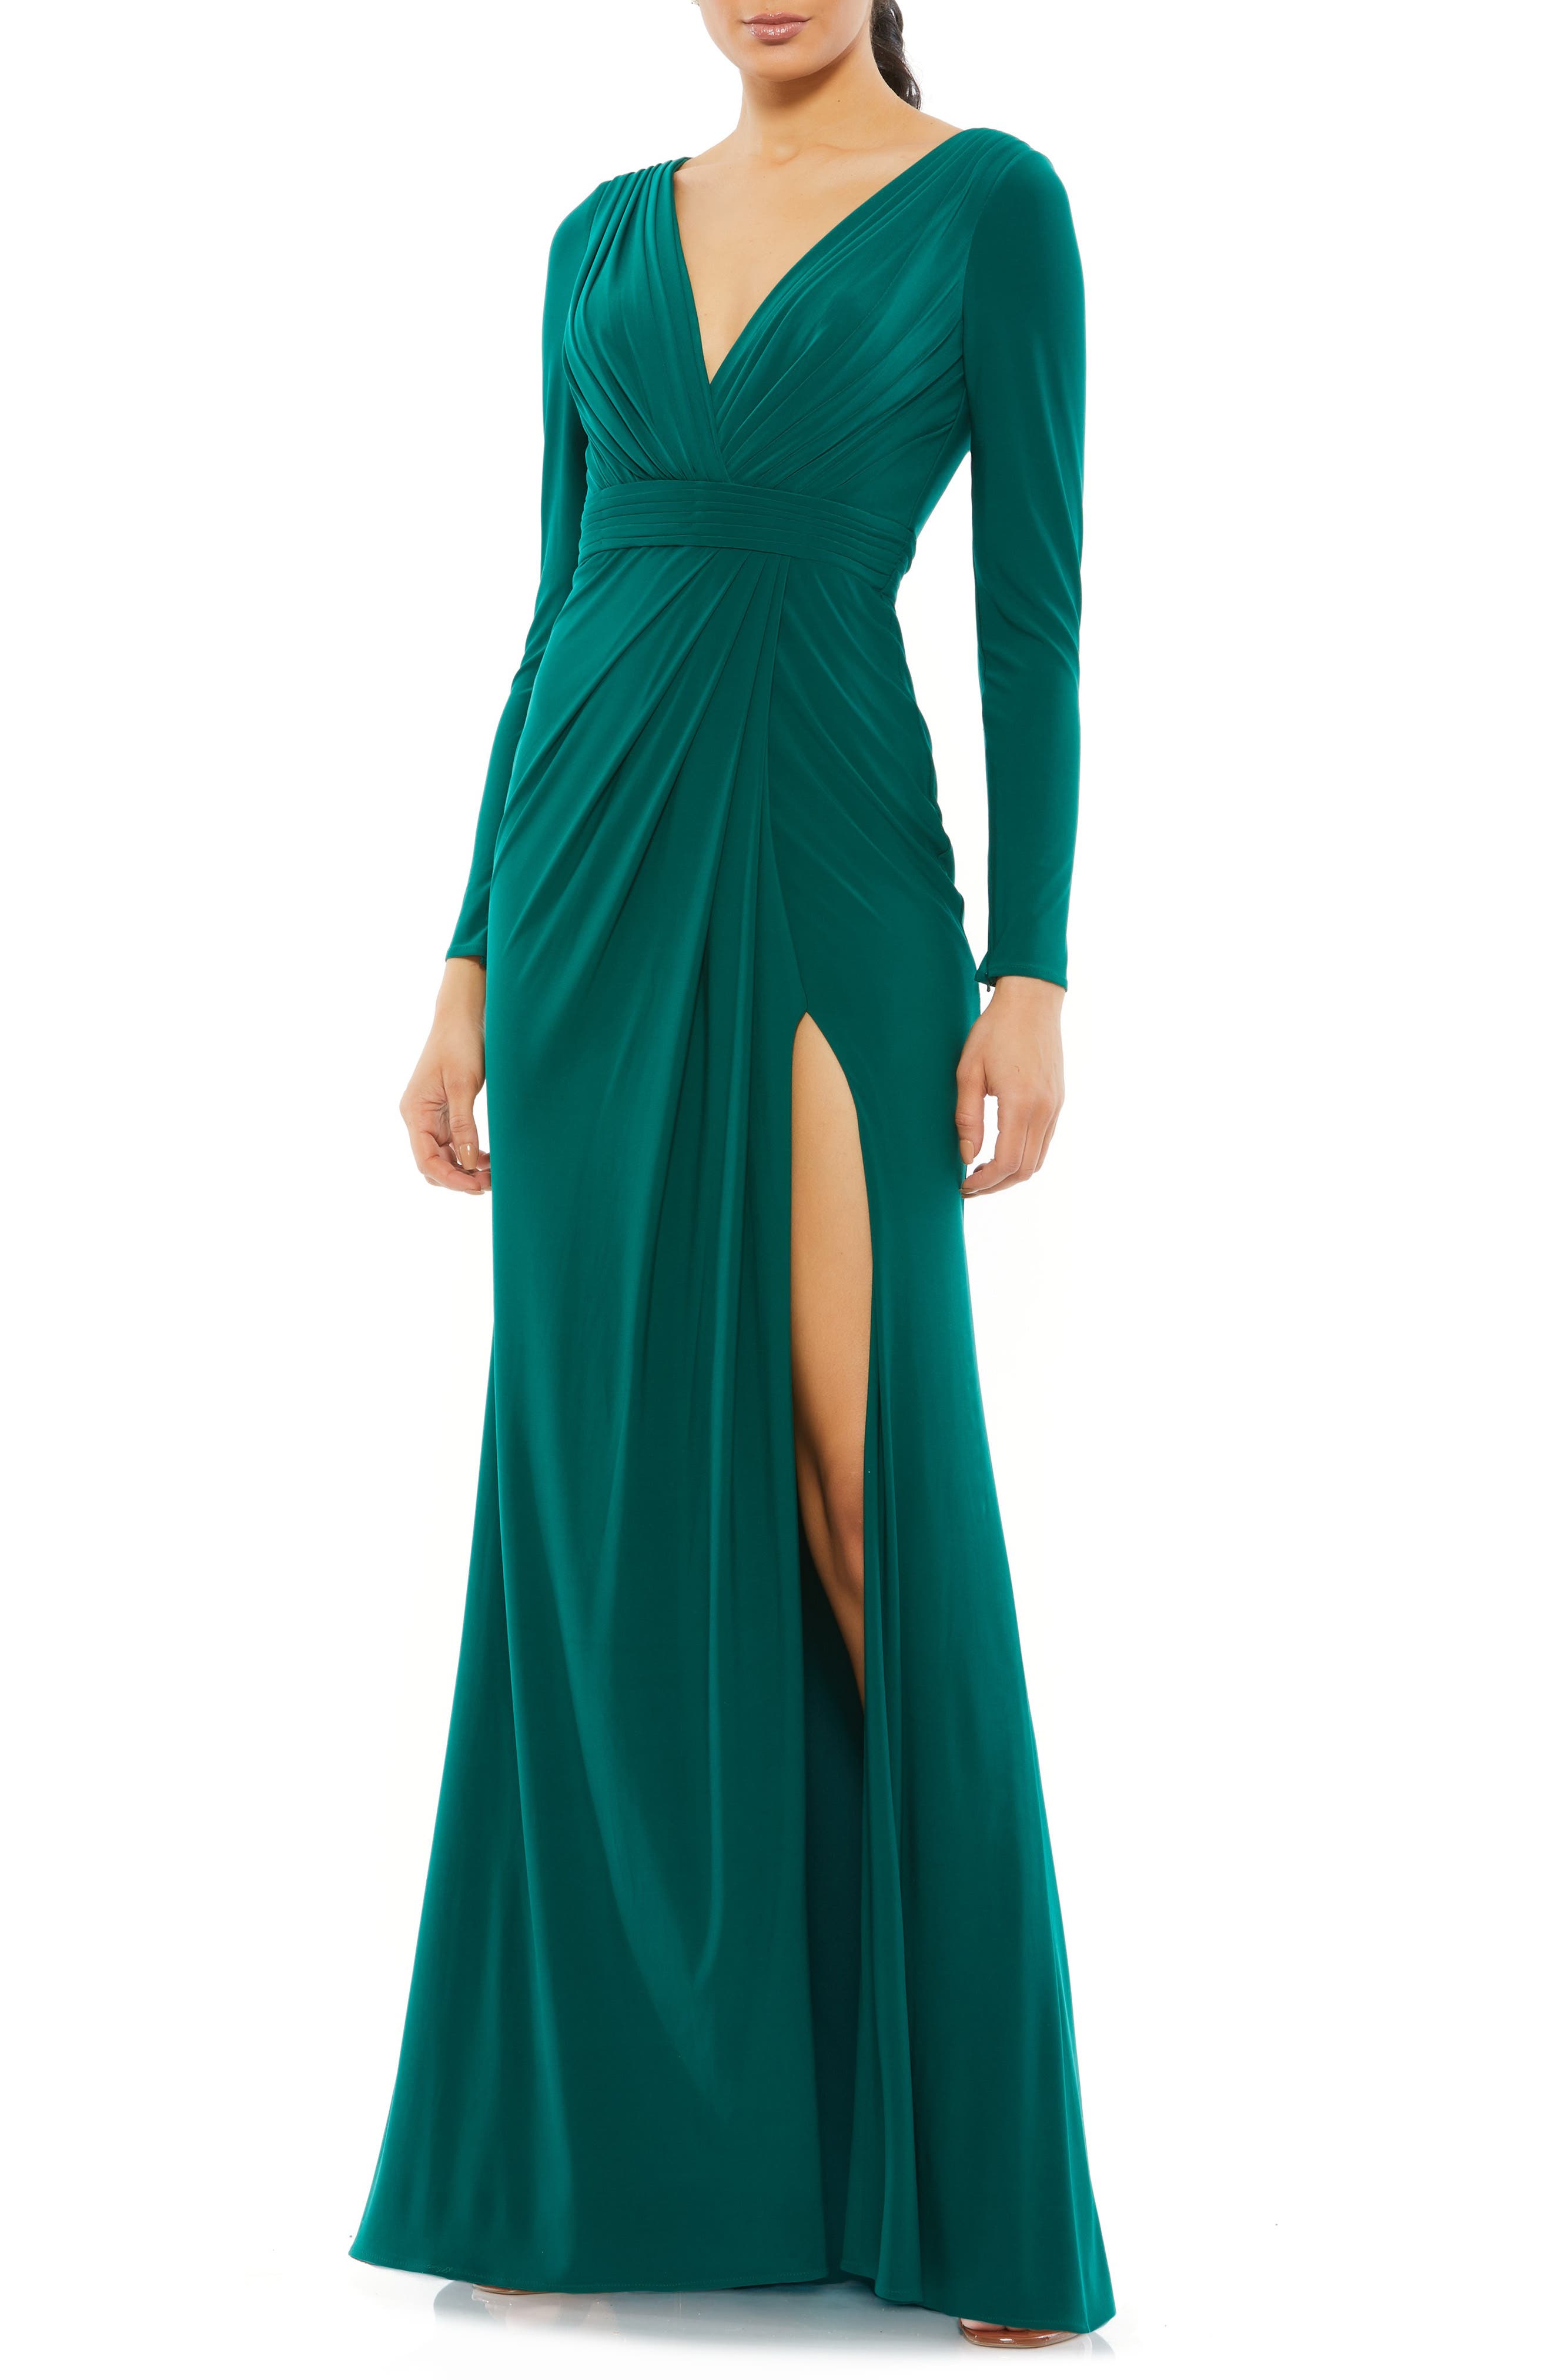 Wrap Formal Dresses ☀ Evening Gowns ...